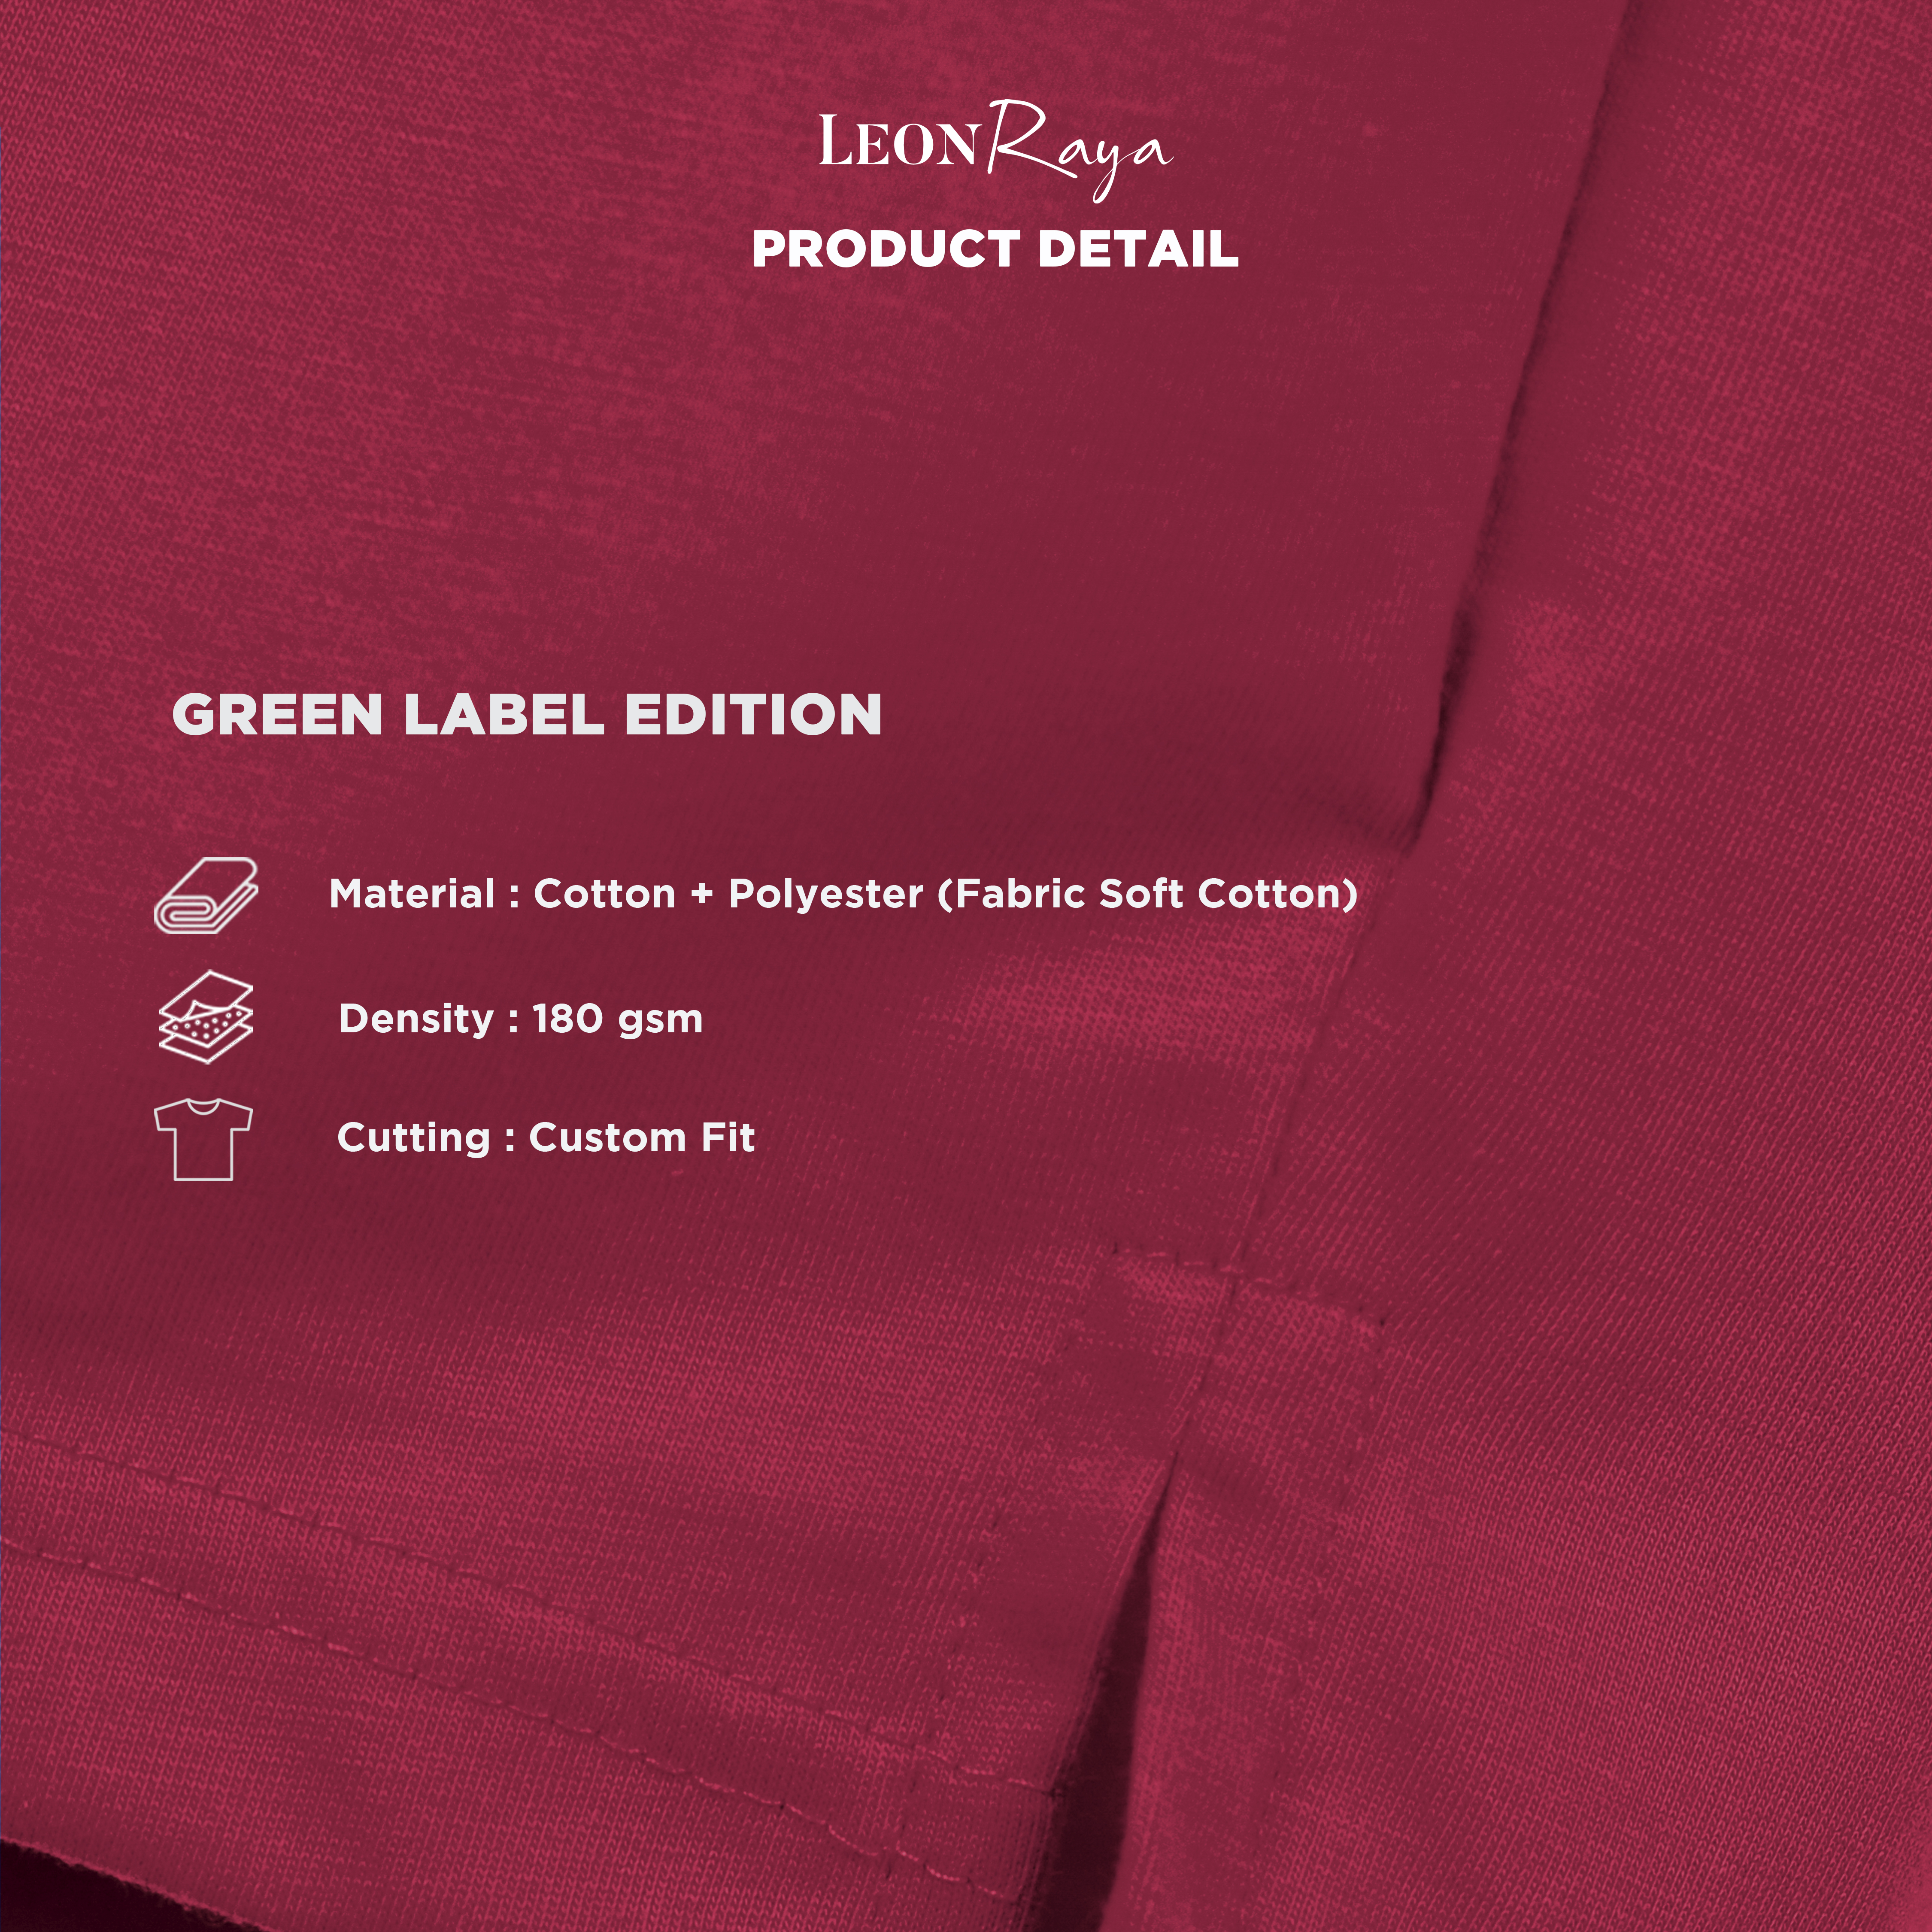 PRODUCT DETAIL GREEN LABEL